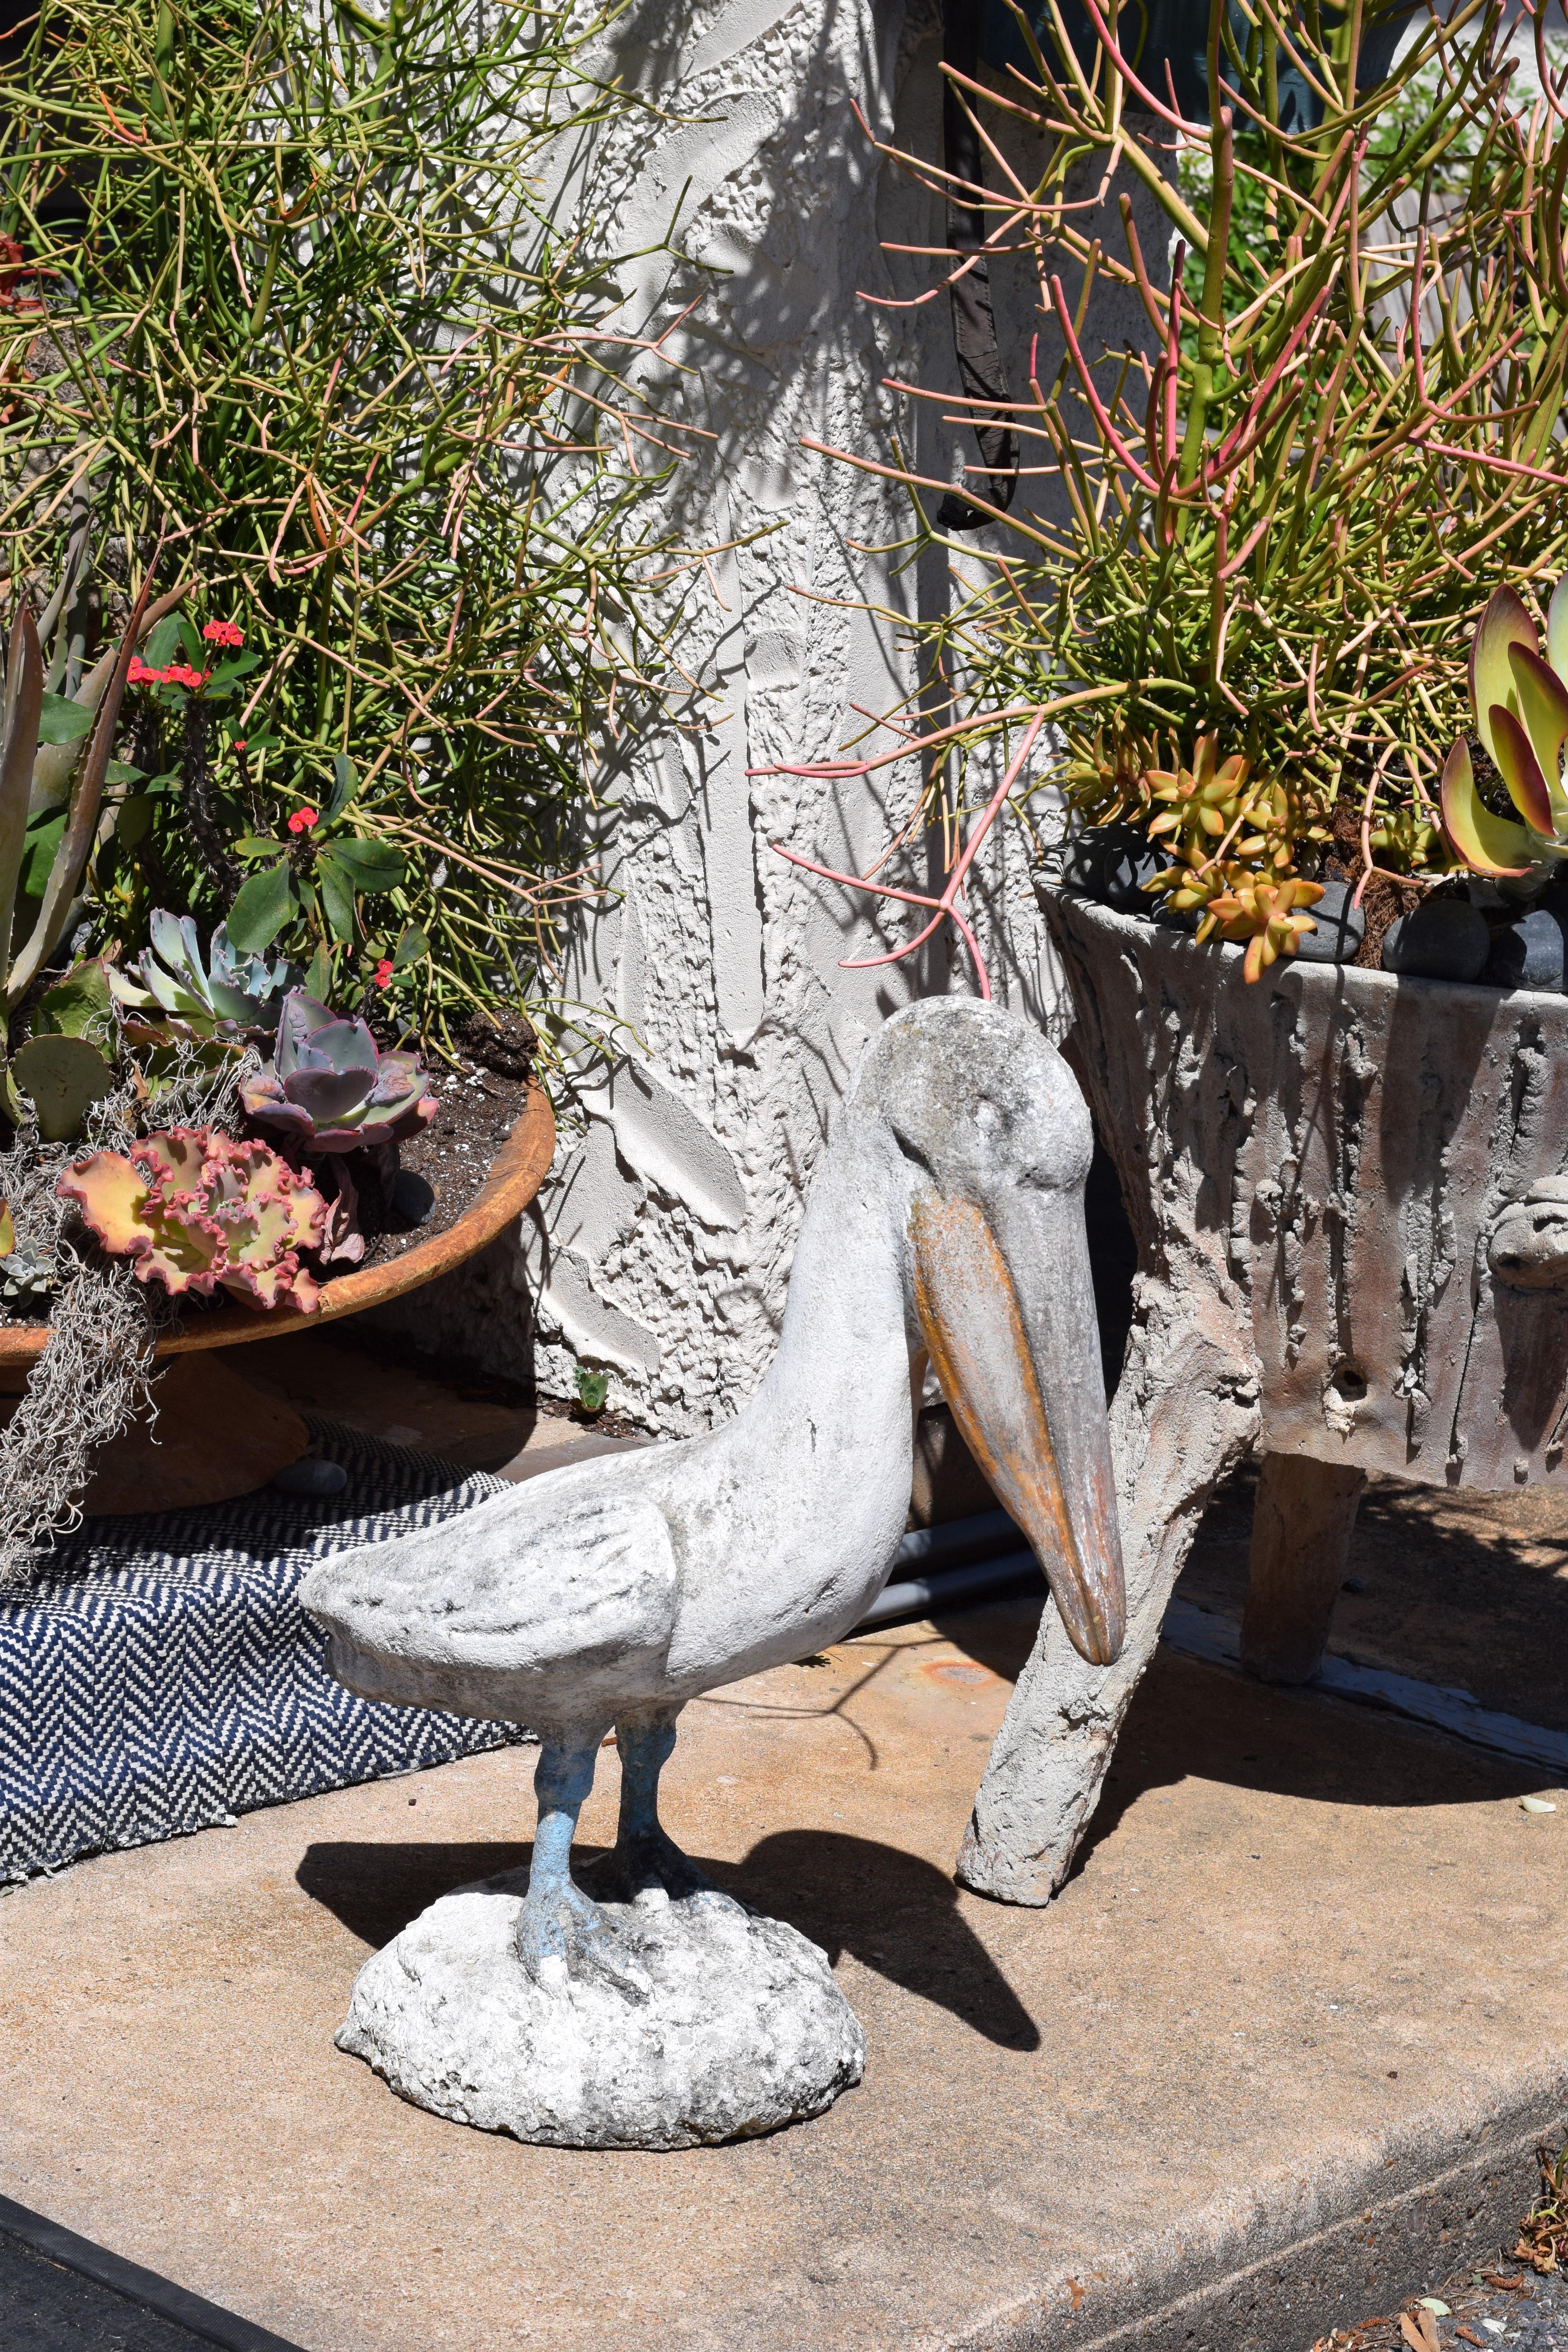 We found this colorful concrete pelican in France. Heavy and sturdy, the concrete bird stands solidly on a concrete base. The pelican and base retain traces of the original paint which has been worn and dulled by age into a soft patina. A perfect